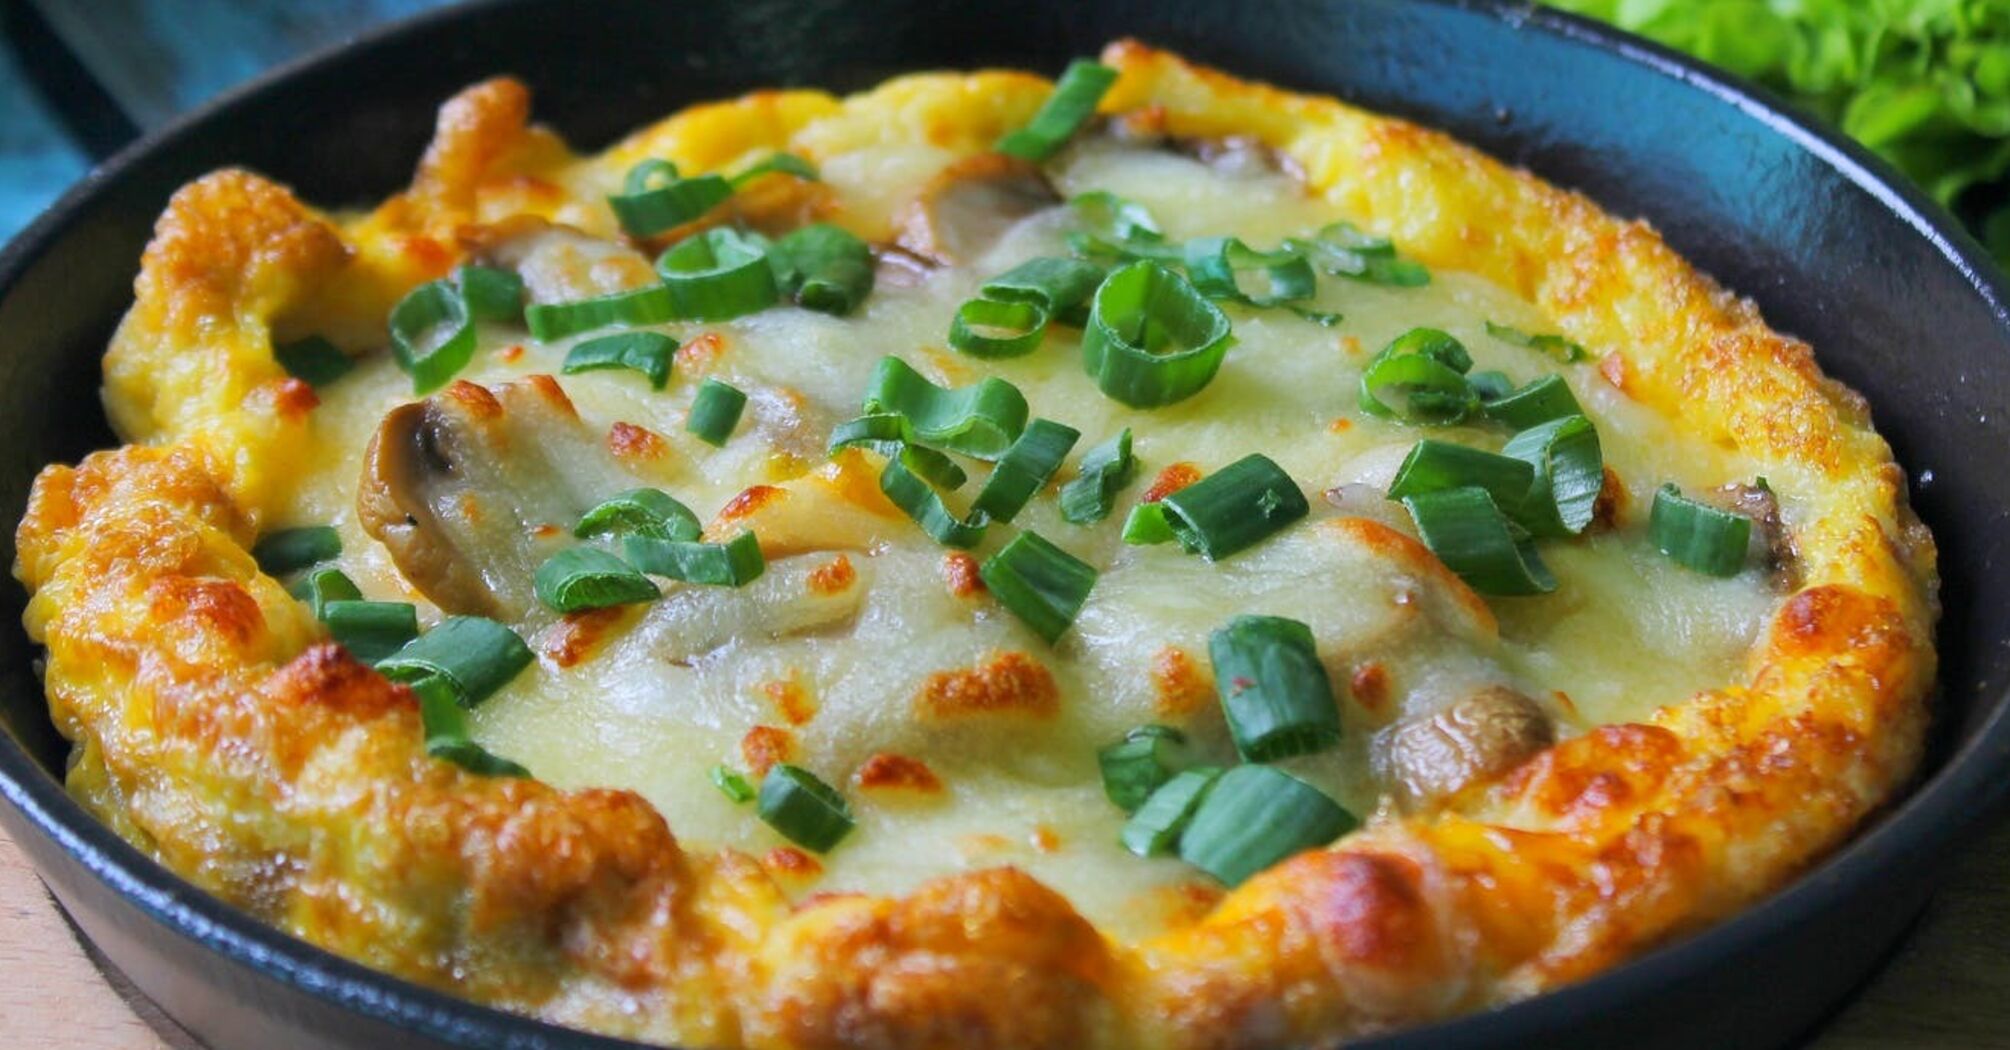 Baked omelet that turns out very puffy and tender